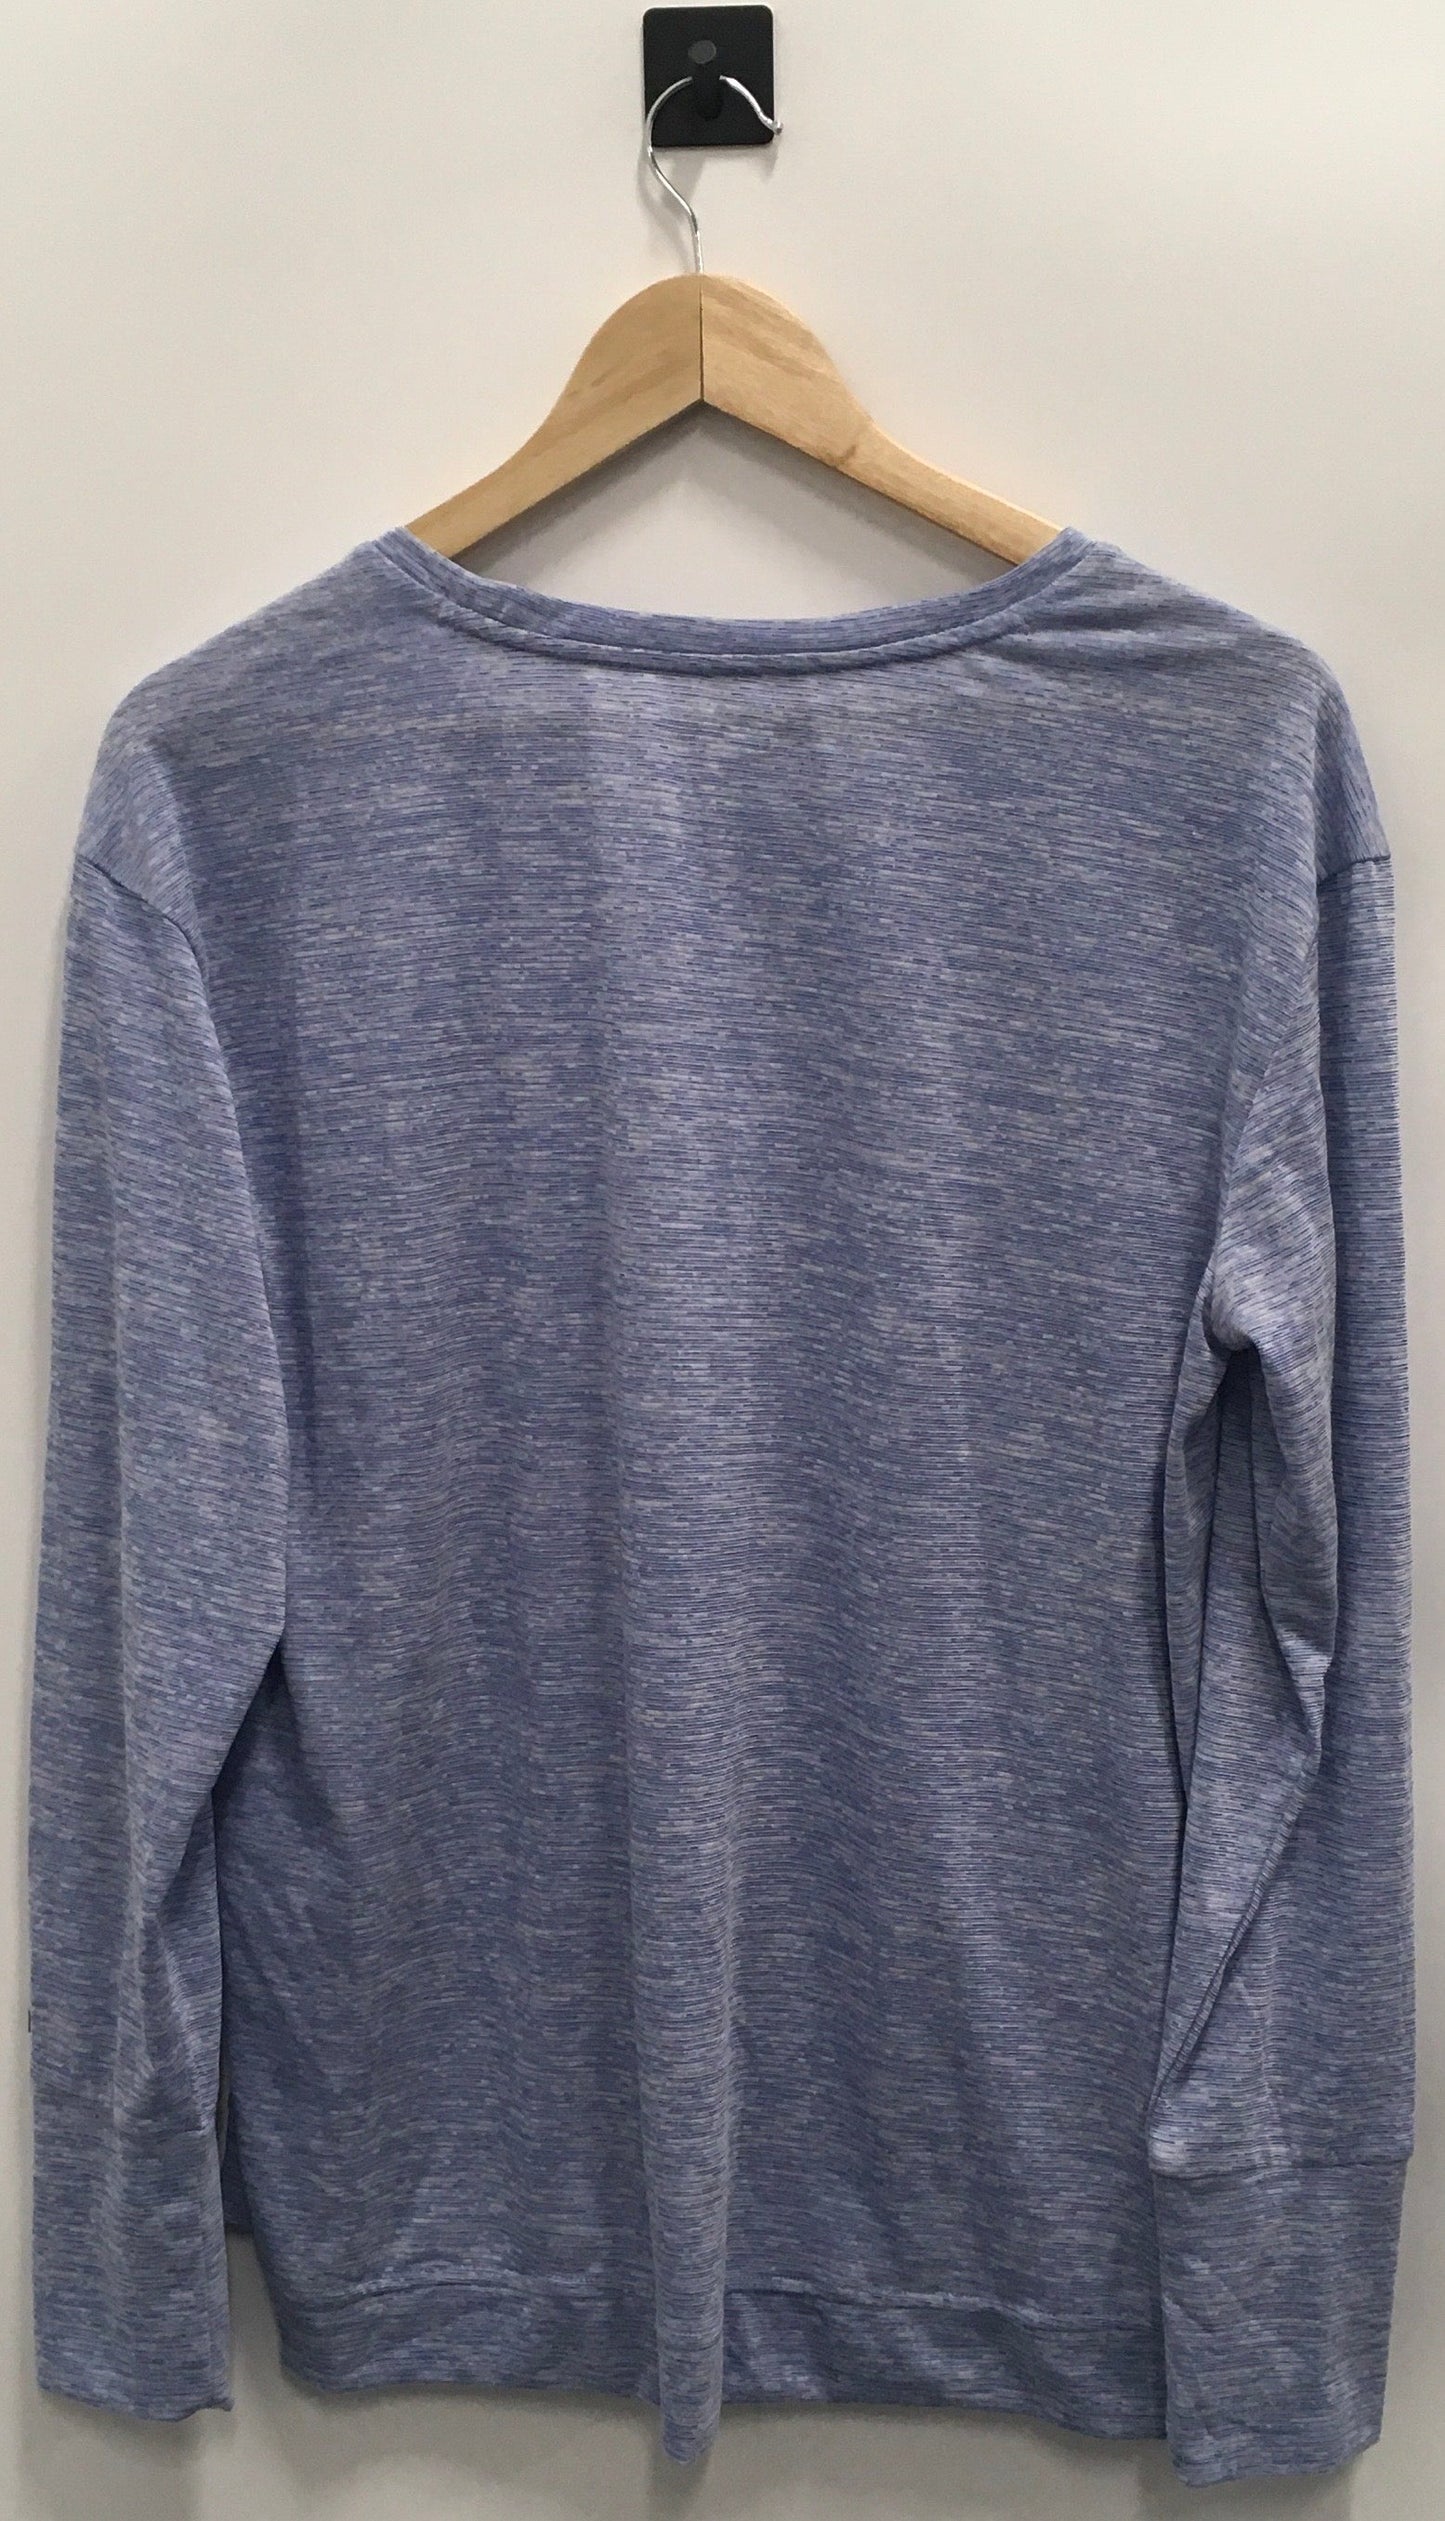 Athletic Top Long Sleeve Crewneck By Columbia  Size: Xl